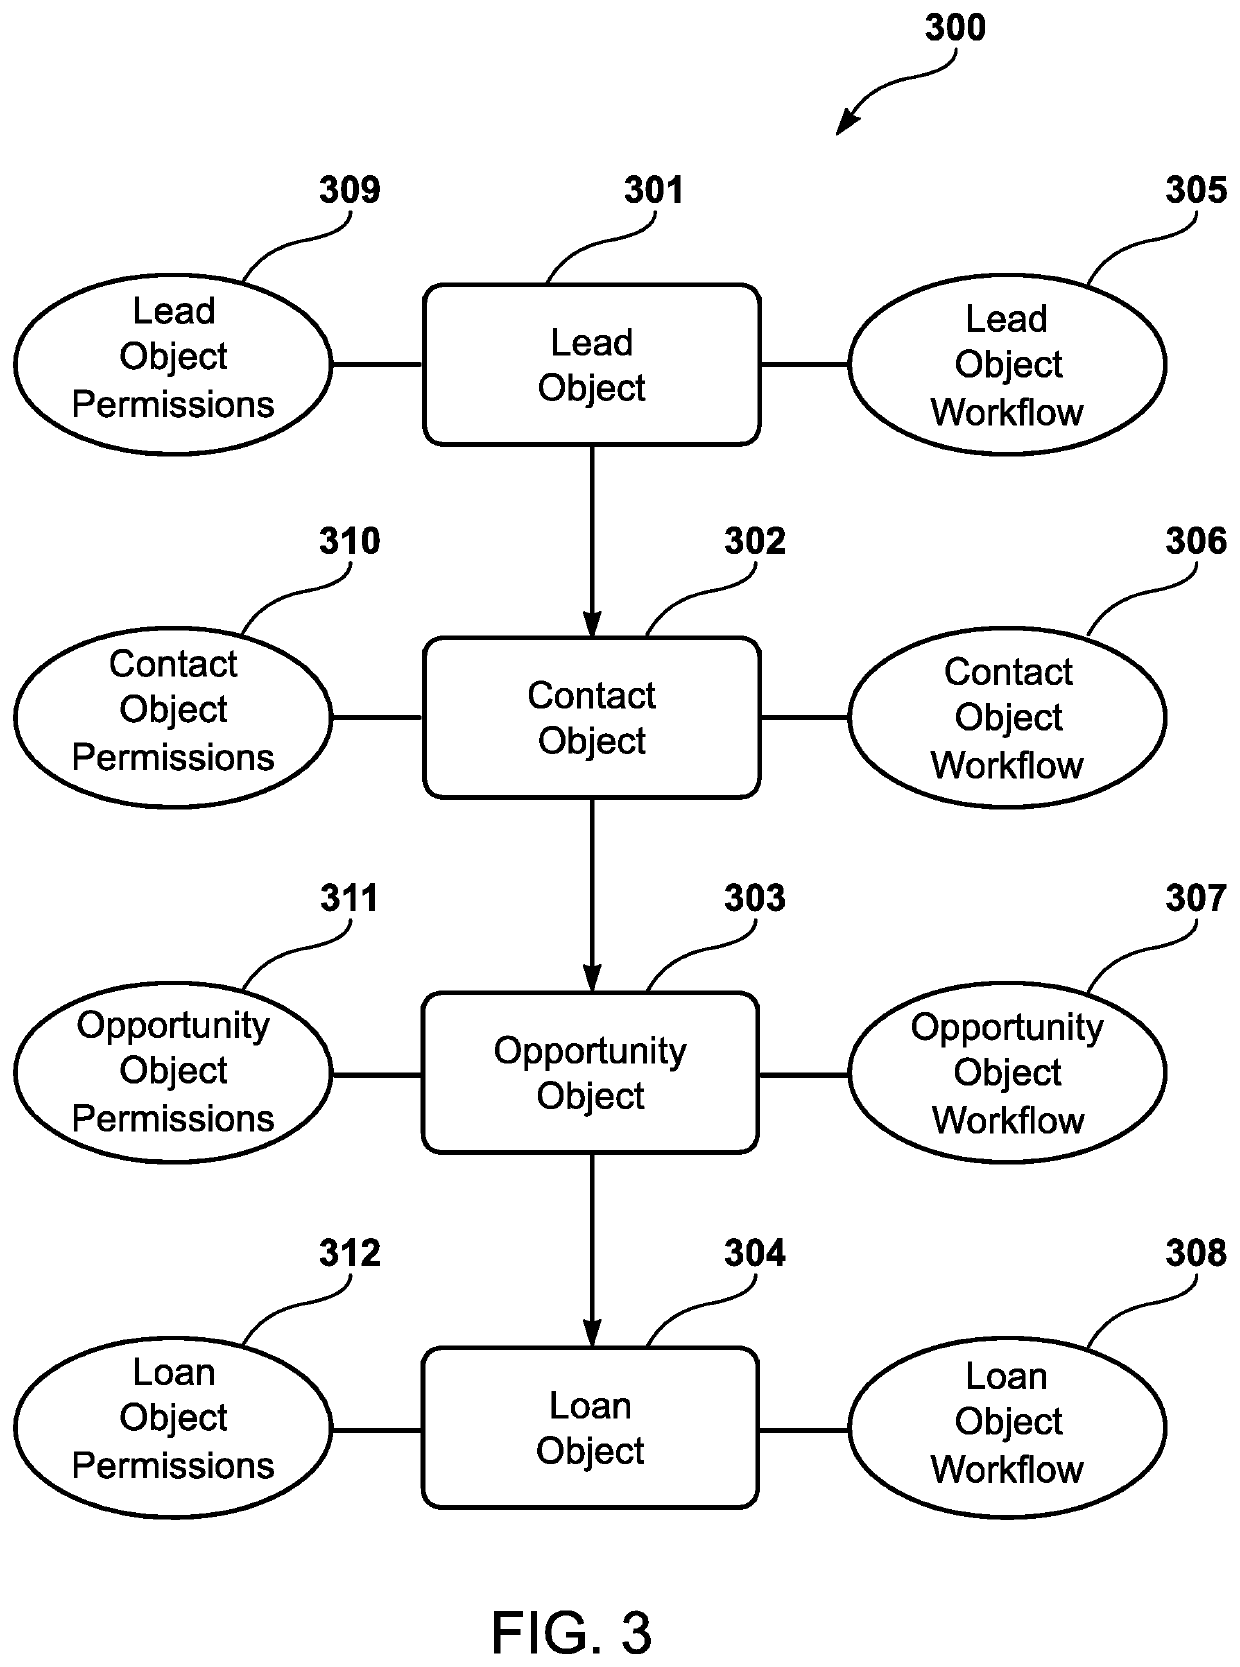 Workflow guidance interface for loan origination system